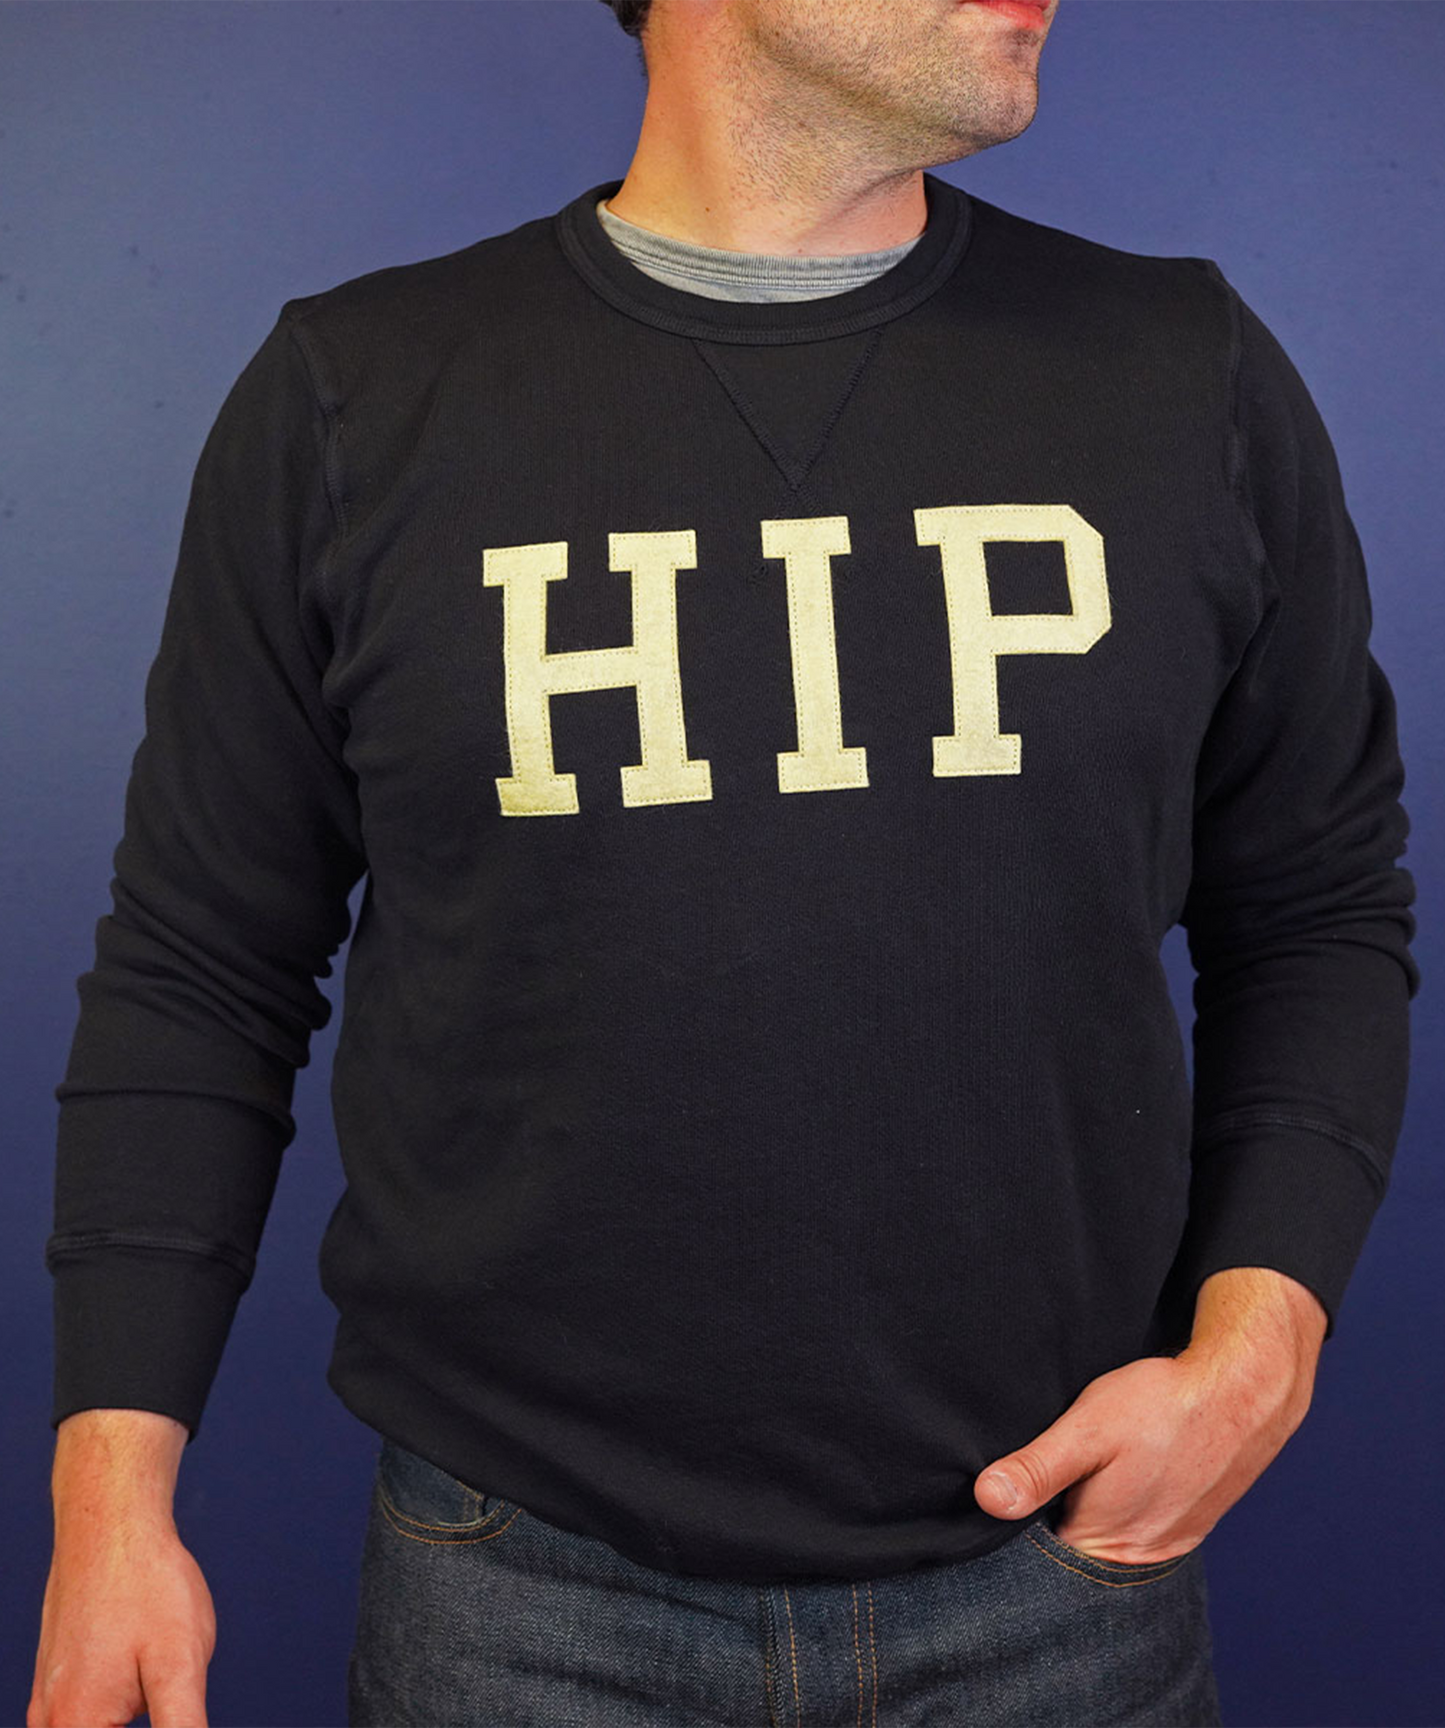 The Hip Stitched Sweatshirt • The Tragically Hip x Oxford Pennant